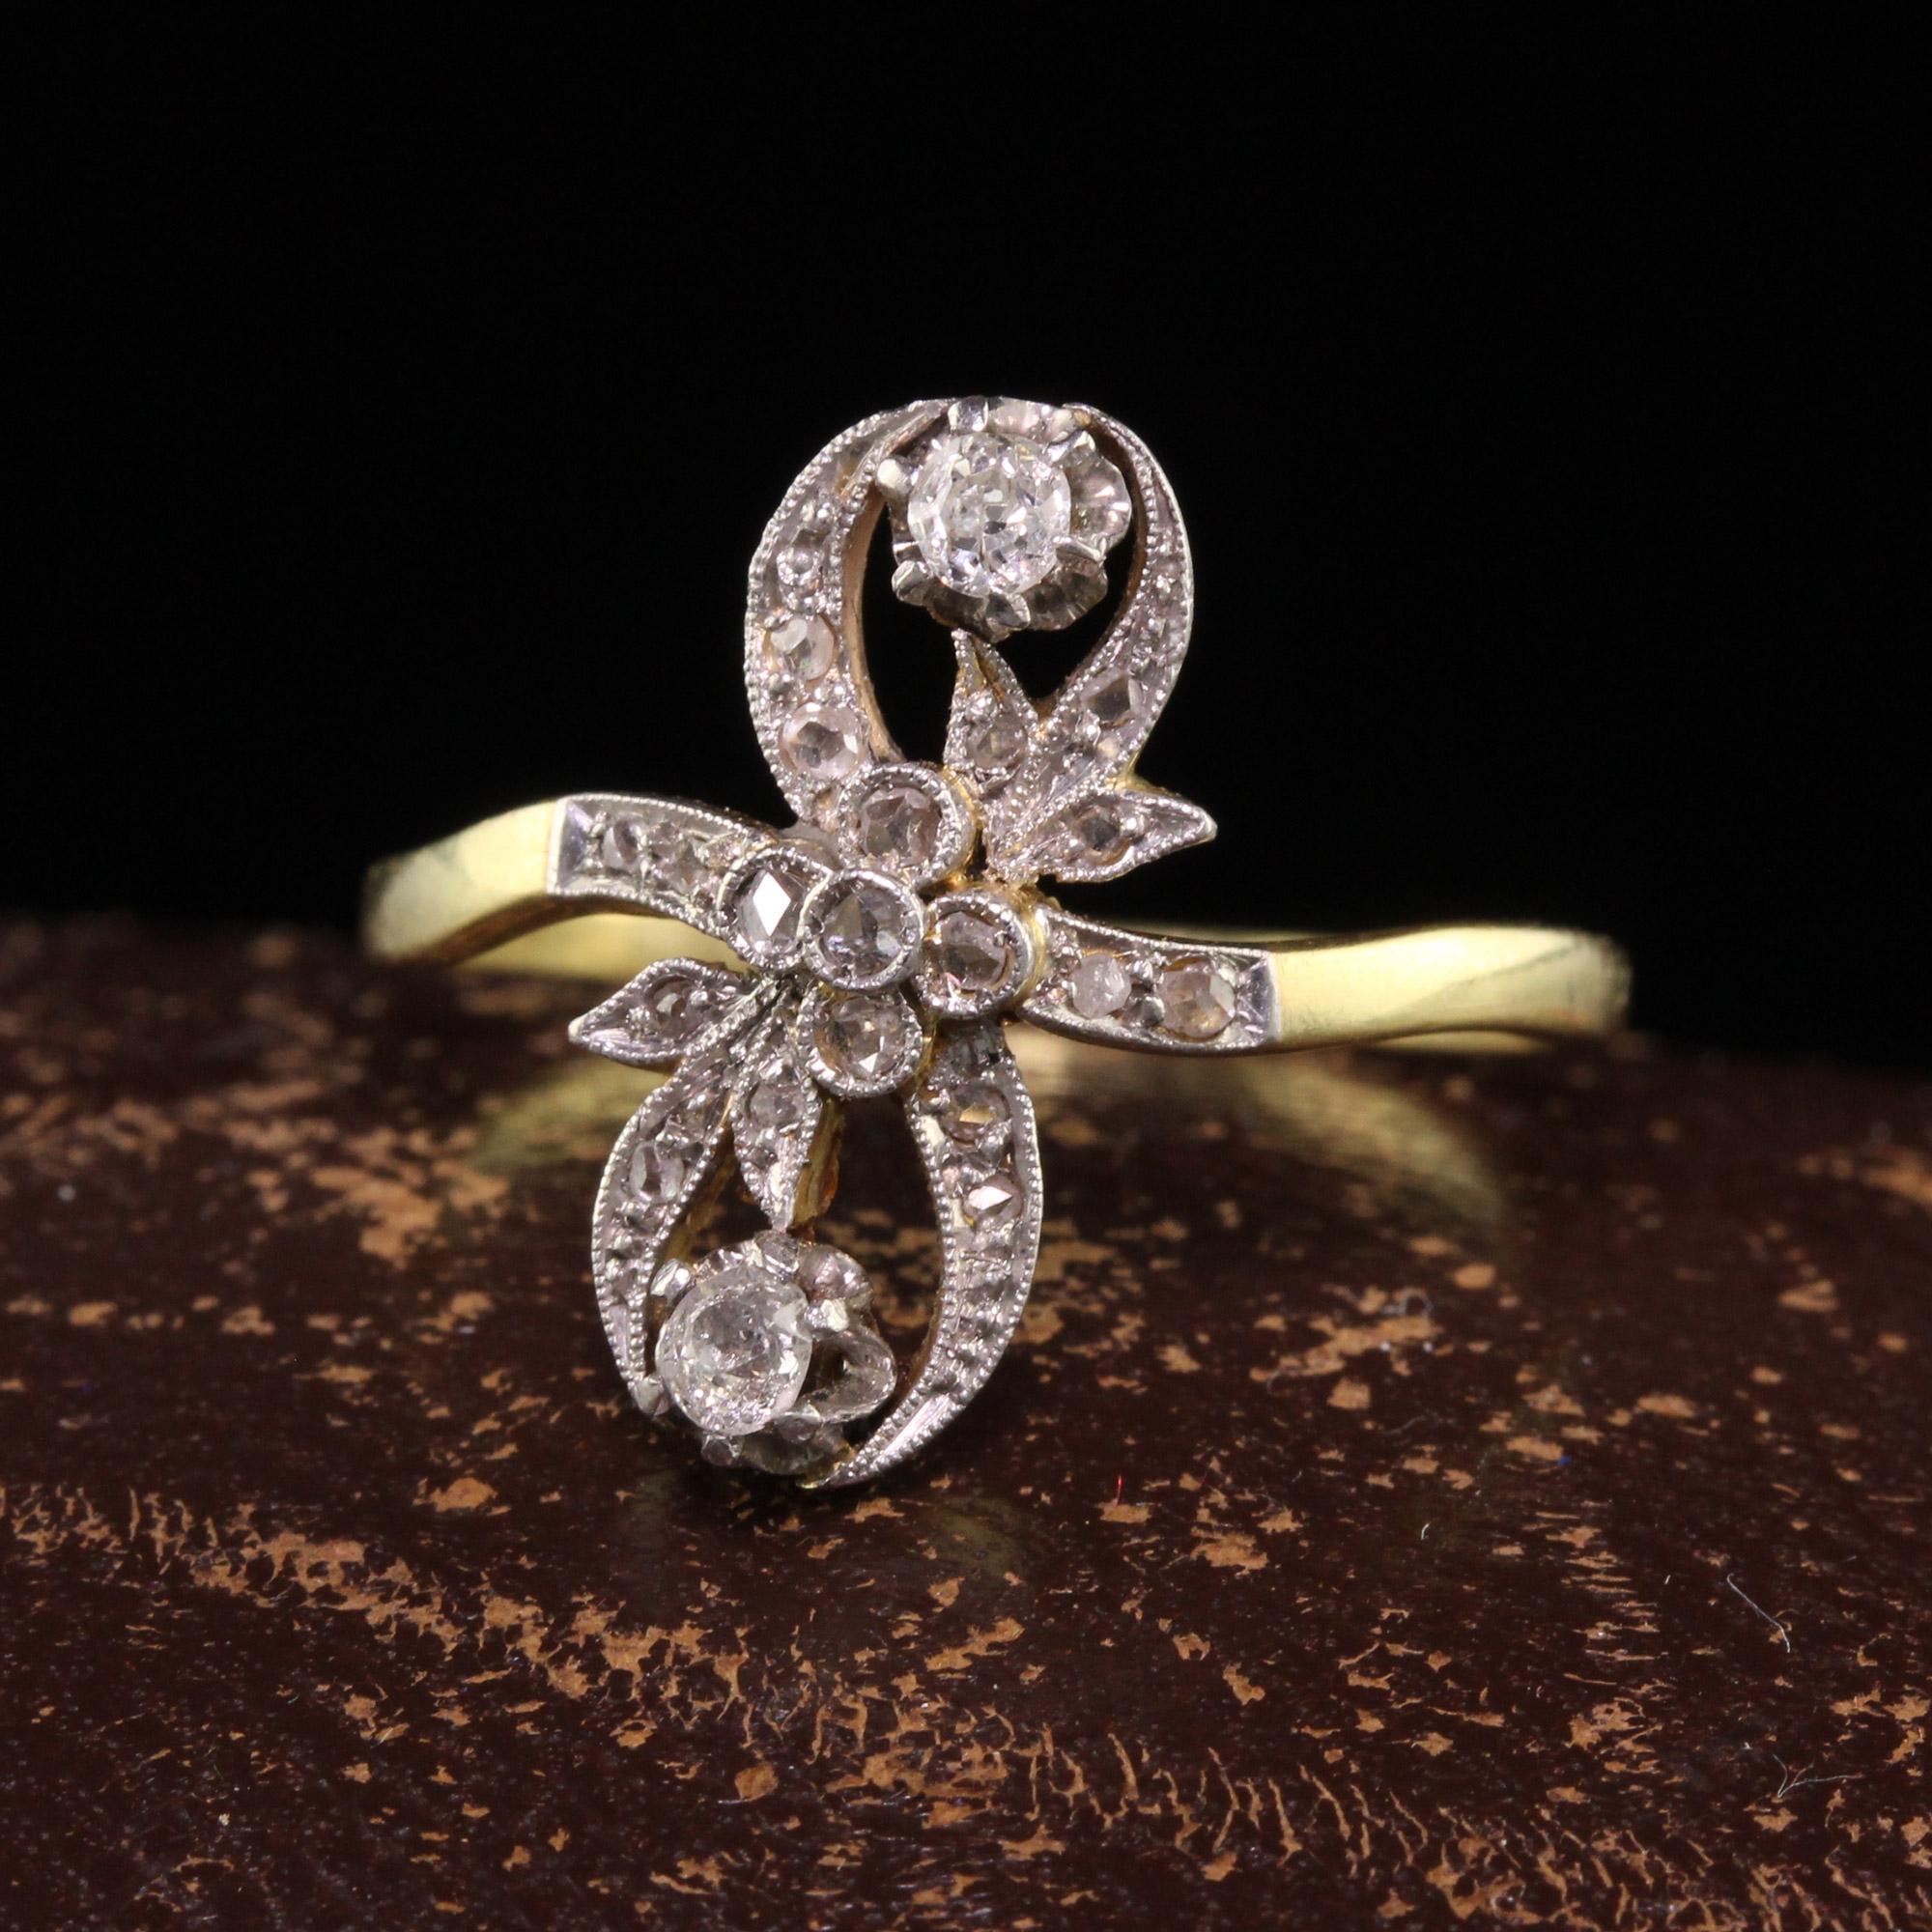 Beautiful Antique Edwardian 18K Yellow Gold Platinum Top Floral Diamond Ring. This gorgeous ring is crafted in 18k yellow gold and platinum top. The top of the ring is covered in rose cut diamonds and two larger old mine cut diamonds. The ring is in